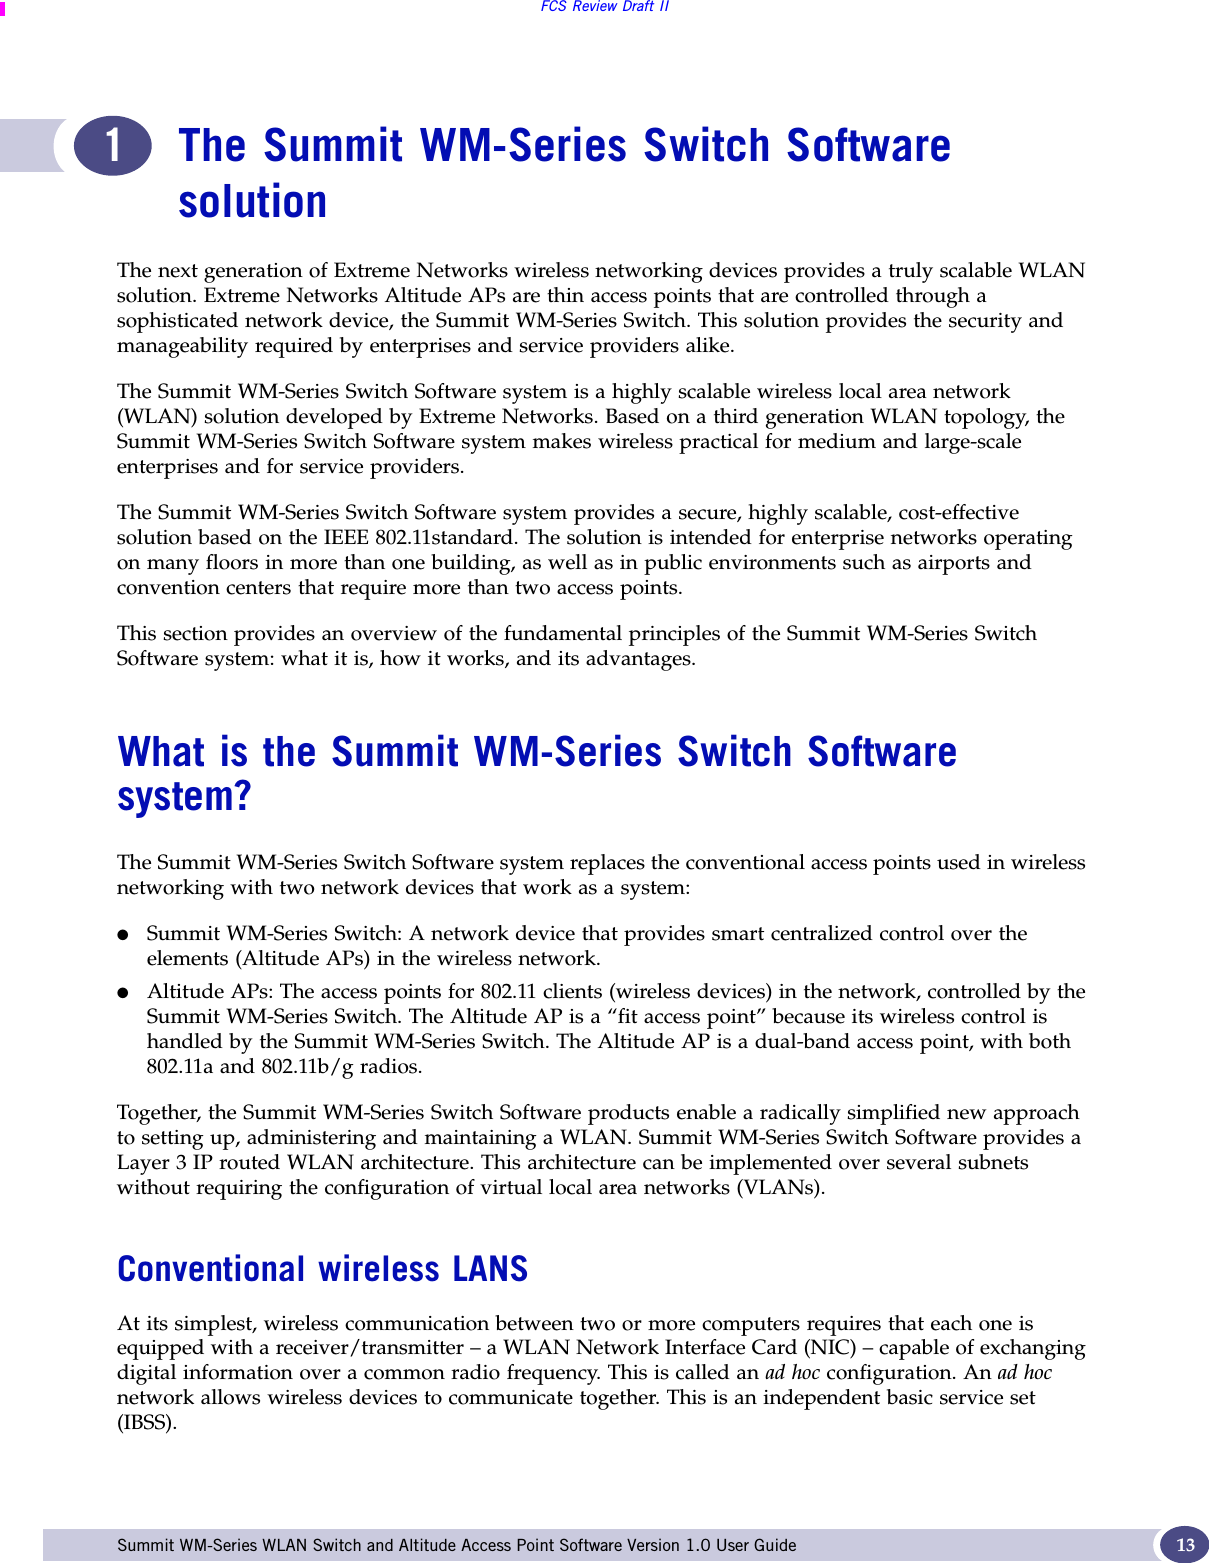 FCS Review Draft IISummit WM-Series WLAN Switch and Altitude Access Point Software Version 1.0 User Guide 131The Summit WM-Series Switch Software solutionThe next generation of Extreme Networks wireless networking devices provides a truly scalable WLAN solution. Extreme Networks Altitude APs are thin access points that are controlled through a sophisticated network device, the Summit WM-Series Switch. This solution provides the security and manageability required by enterprises and service providers alike.The Summit WM-Series Switch Software system is a highly scalable wireless local area network (WLAN) solution developed by Extreme Networks. Based on a third generation WLAN topology, the Summit WM-Series Switch Software system makes wireless practical for medium and large-scale enterprises and for service providers. The Summit WM-Series Switch Software system provides a secure, highly scalable, cost-effective solution based on the IEEE 802.11standard. The solution is intended for enterprise networks operating on many floors in more than one building, as well as in public environments such as airports and convention centers that require more than two access points. This section provides an overview of the fundamental principles of the Summit WM-Series Switch Software system: what it is, how it works, and its advantages.What is the Summit WM-Series Switch Software system?The Summit WM-Series Switch Software system replaces the conventional access points used in wireless networking with two network devices that work as a system:●Summit WM-Series Switch: A network device that provides smart centralized control over the elements (Altitude APs) in the wireless network.●Altitude APs: The access points for 802.11 clients (wireless devices) in the network, controlled by the Summit WM-Series Switch. The Altitude AP is a “fit access point” because its wireless control is handled by the Summit WM-Series Switch. The Altitude AP is a dual-band access point, with both 802.11a and 802.11b/g radios.Together, the Summit WM-Series Switch Software products enable a radically simplified new approach to setting up, administering and maintaining a WLAN. Summit WM-Series Switch Software provides a Layer 3 IP routed WLAN architecture. This architecture can be implemented over several subnets without requiring the configuration of virtual local area networks (VLANs).Conventional wireless LANSAt its simplest, wireless communication between two or more computers requires that each one is equipped with a receiver/transmitter – a WLAN Network Interface Card (NIC) – capable of exchanging digital information over a common radio frequency. This is called an ad hoc configuration. An ad hoc network allows wireless devices to communicate together. This is an independent basic service set (IBSS).